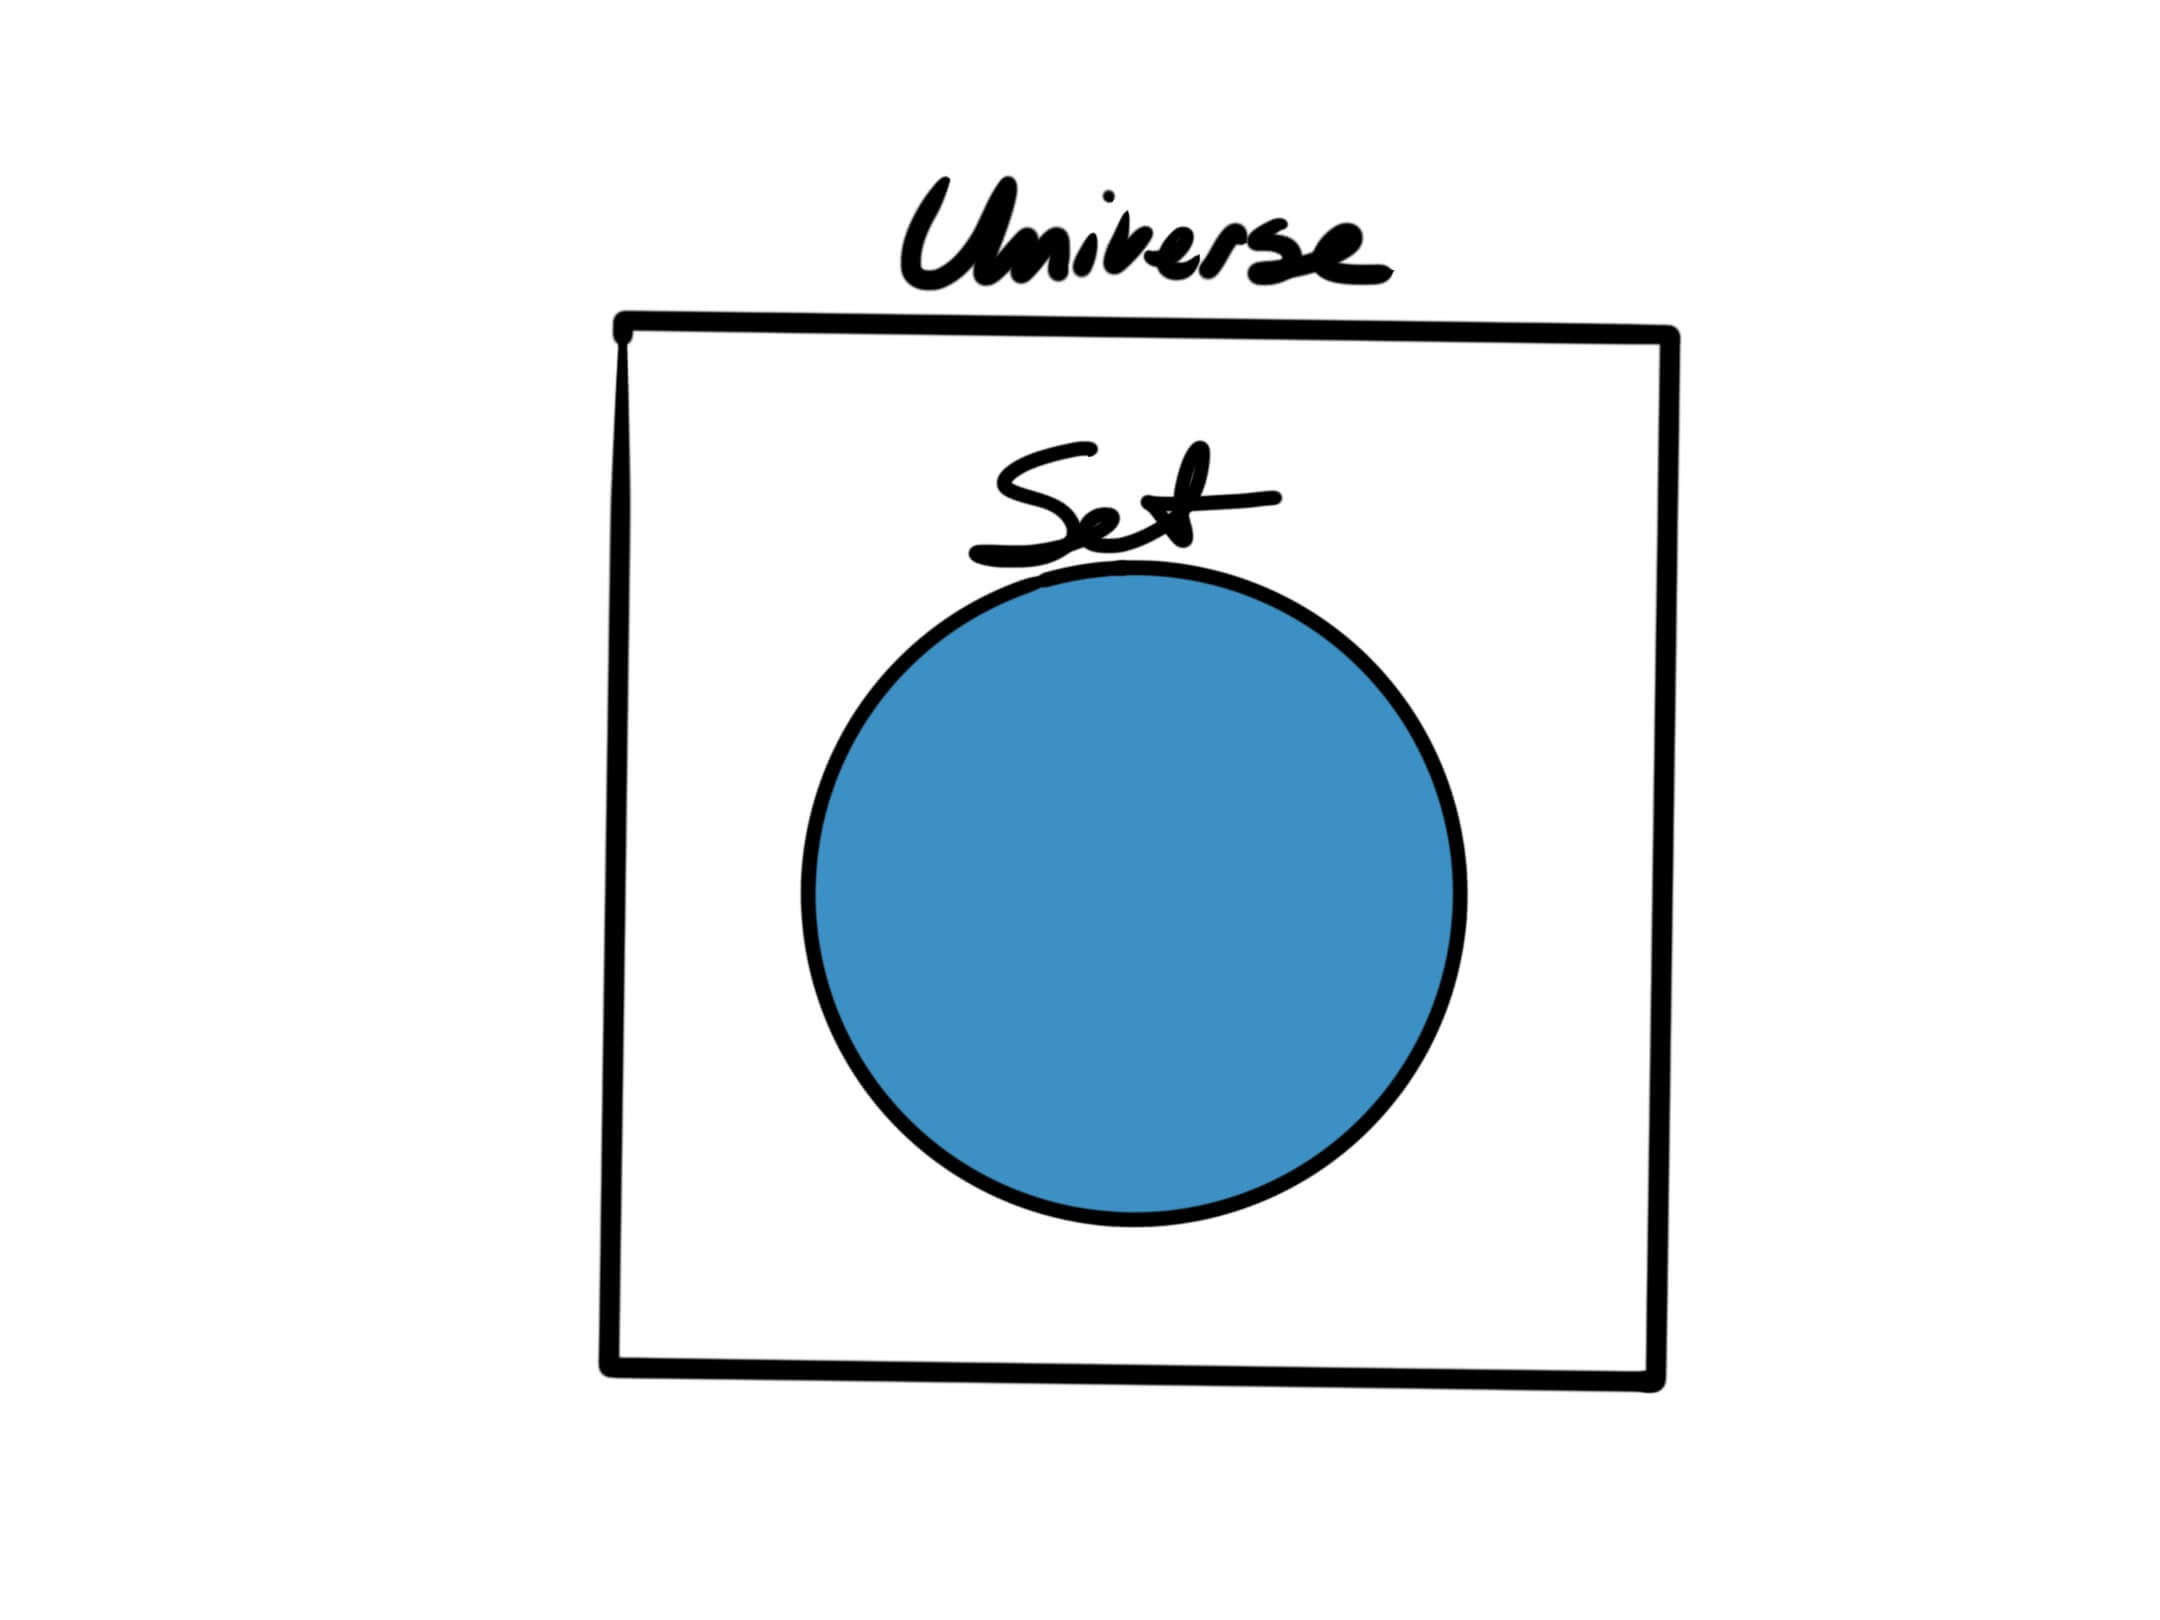 A circle representing a 'set', surrounded by a square representing the 'universe' the set lives in